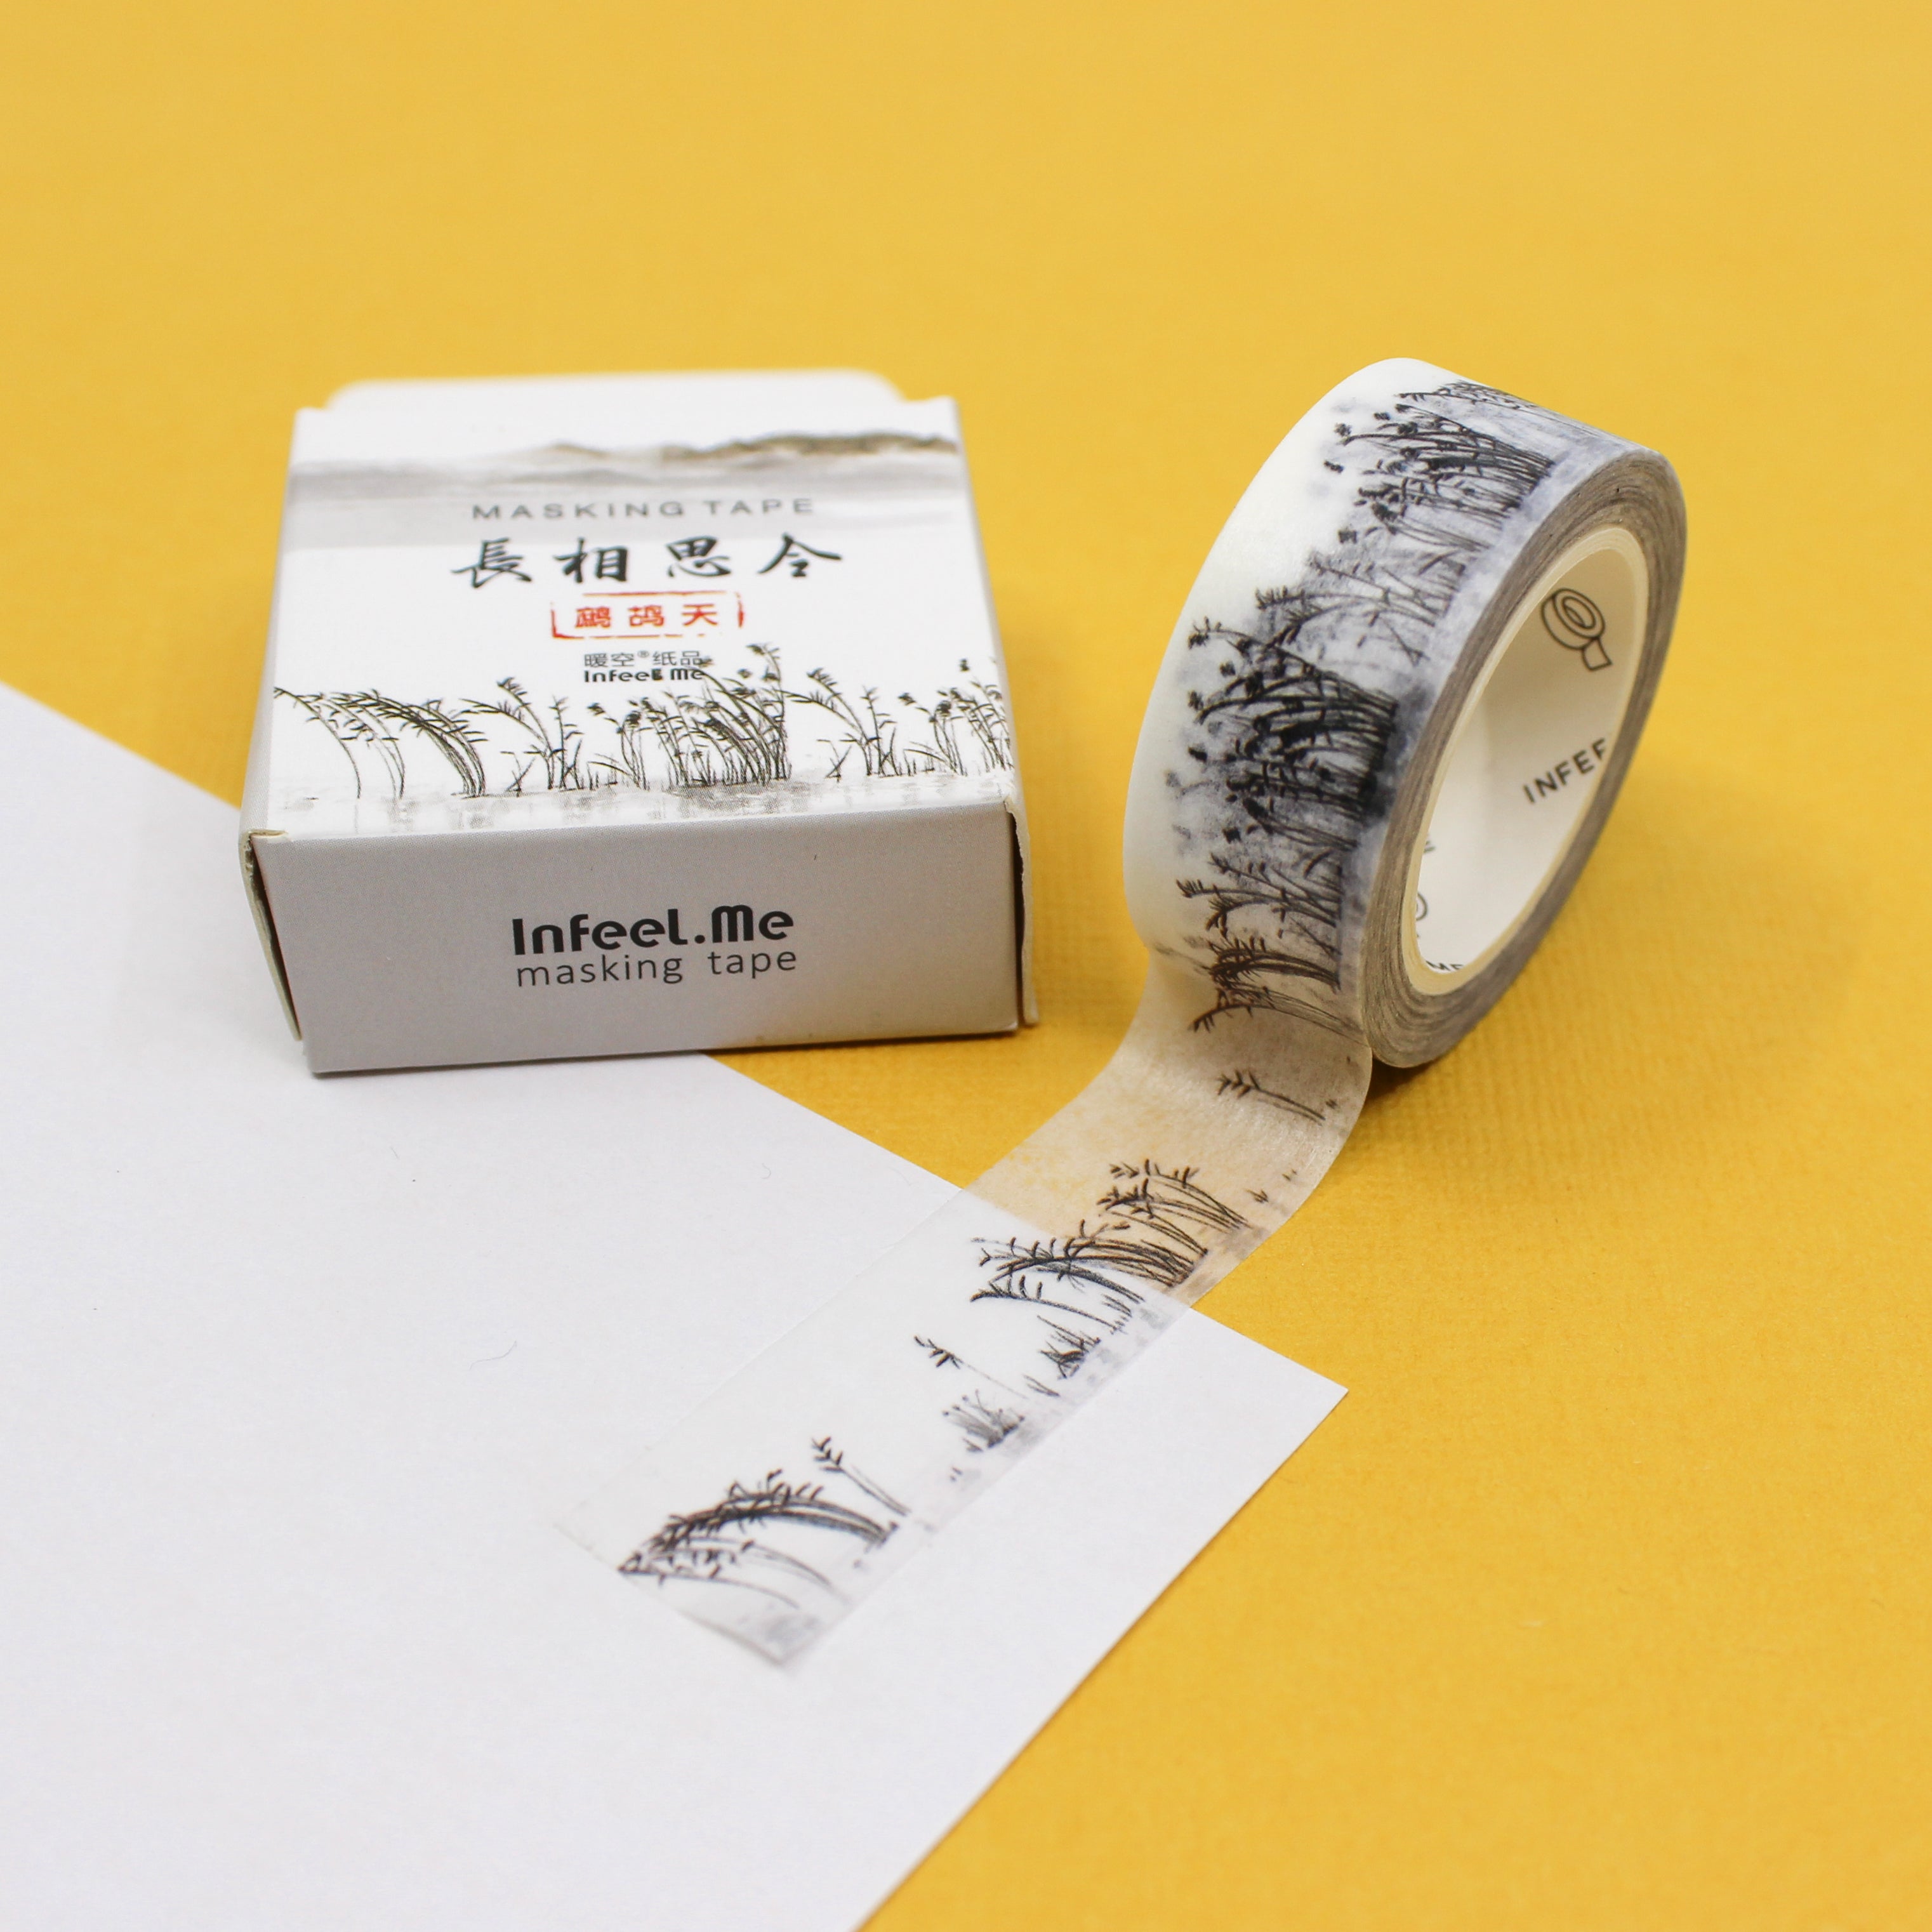 This is shadowy wheat pattern washi tape from BBB Supplies Craft Shop